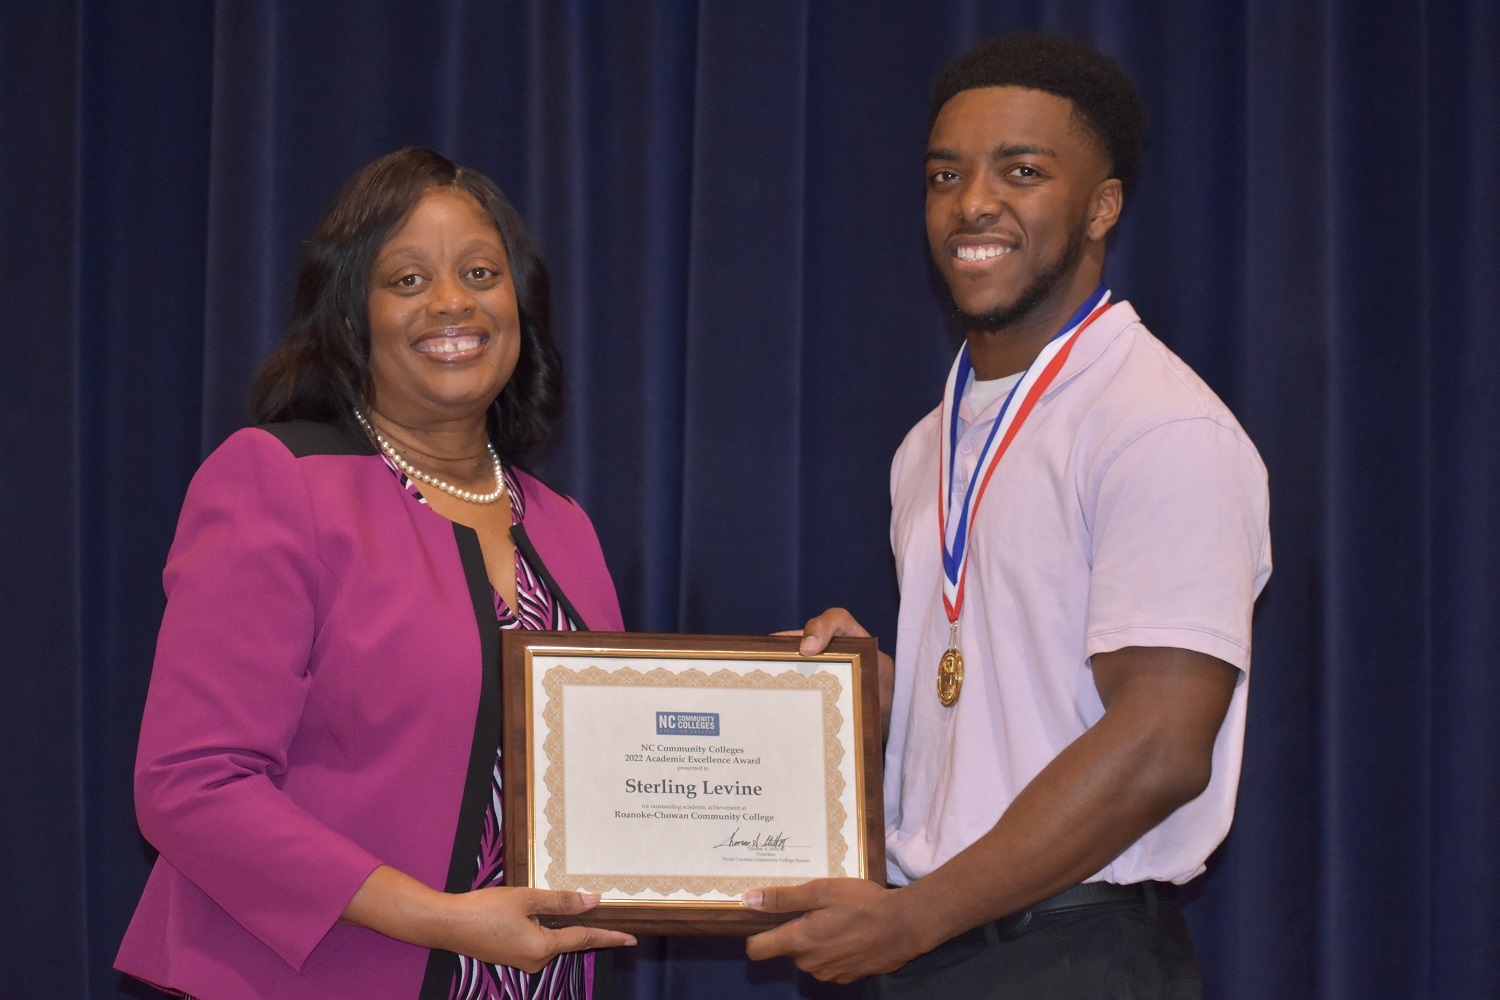 President Murray J. Williams presents North Carolina Community College Academic Excellence Award to Sterling Levine.